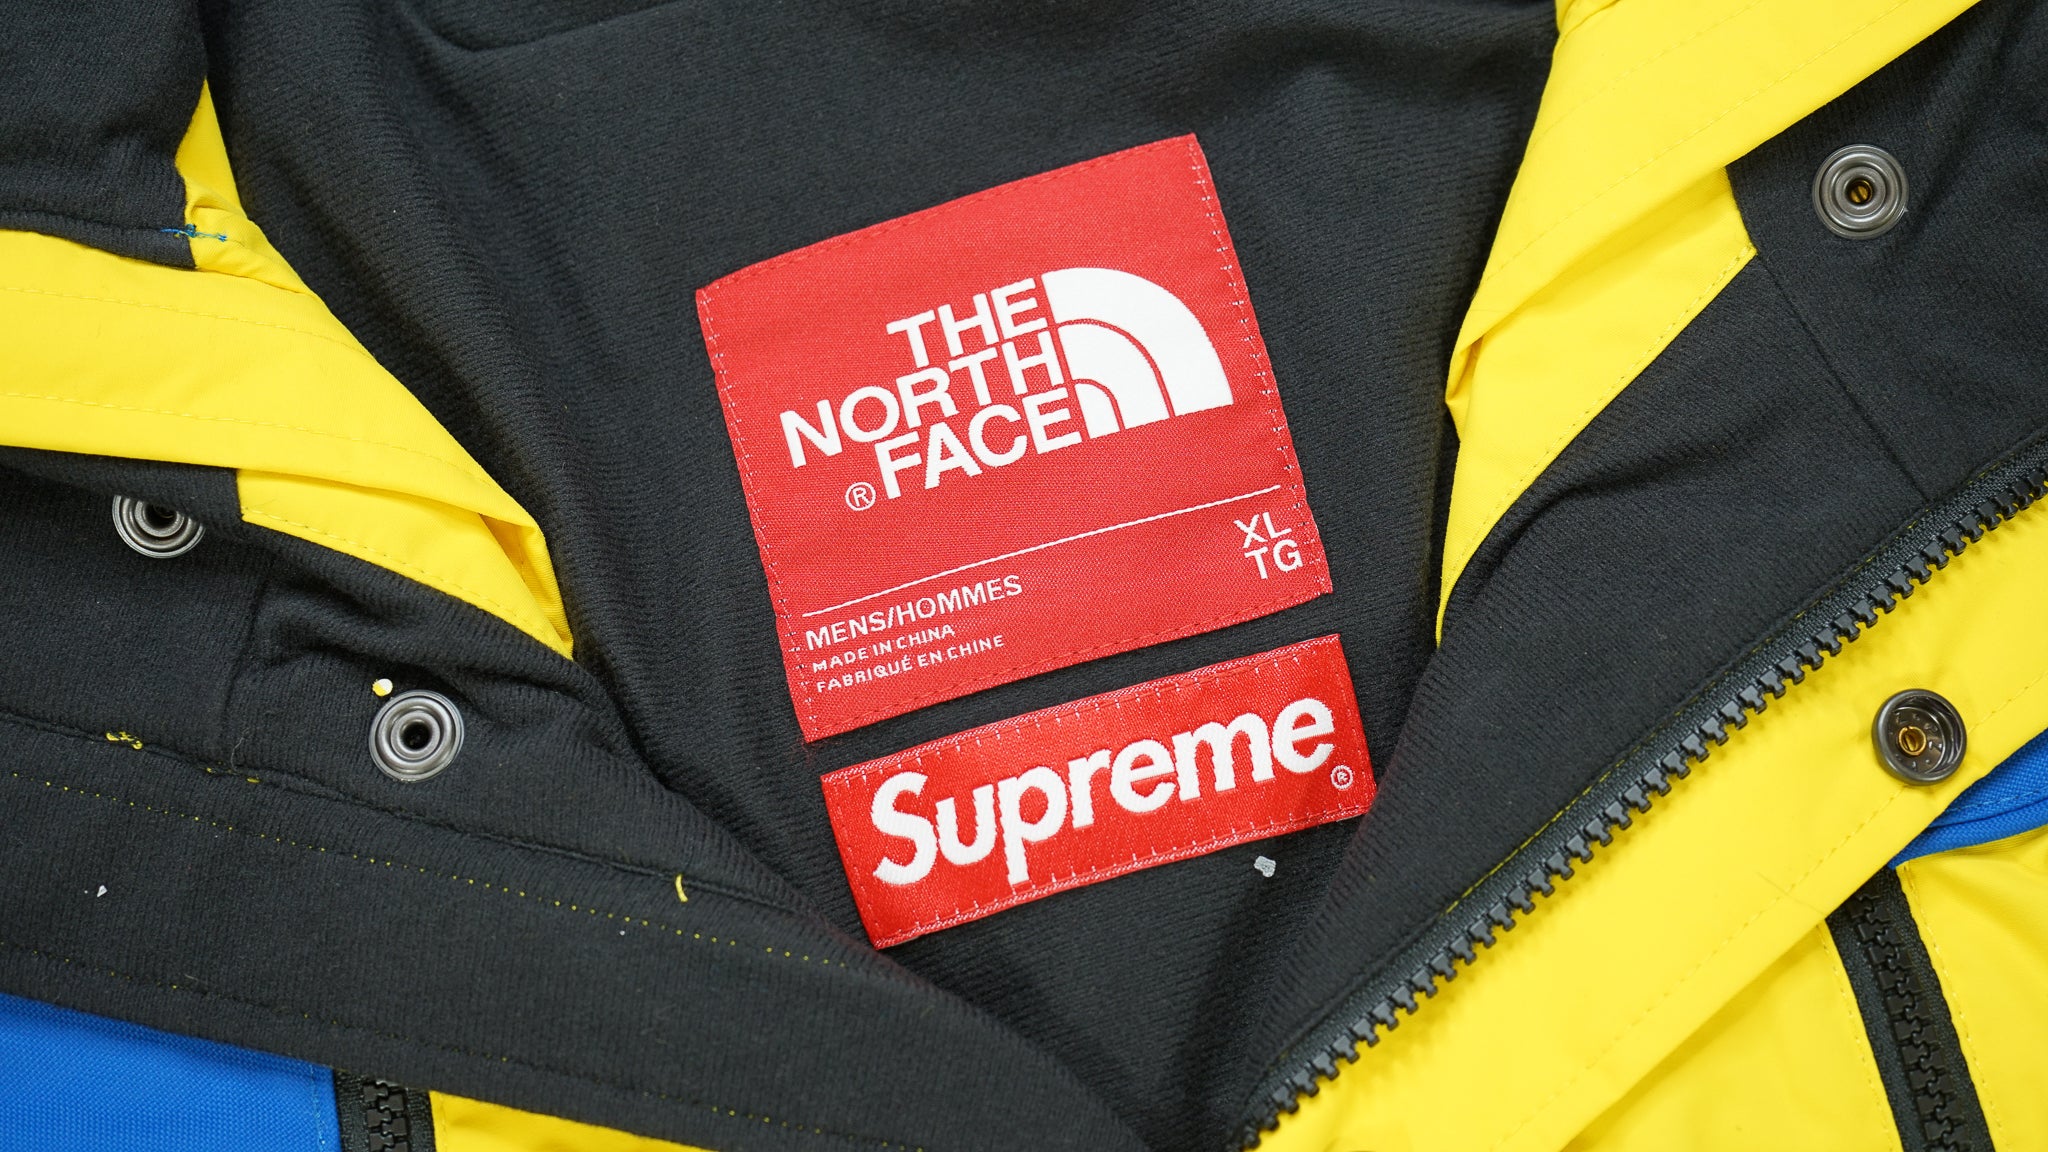 SS16 Supreme x The North Face 